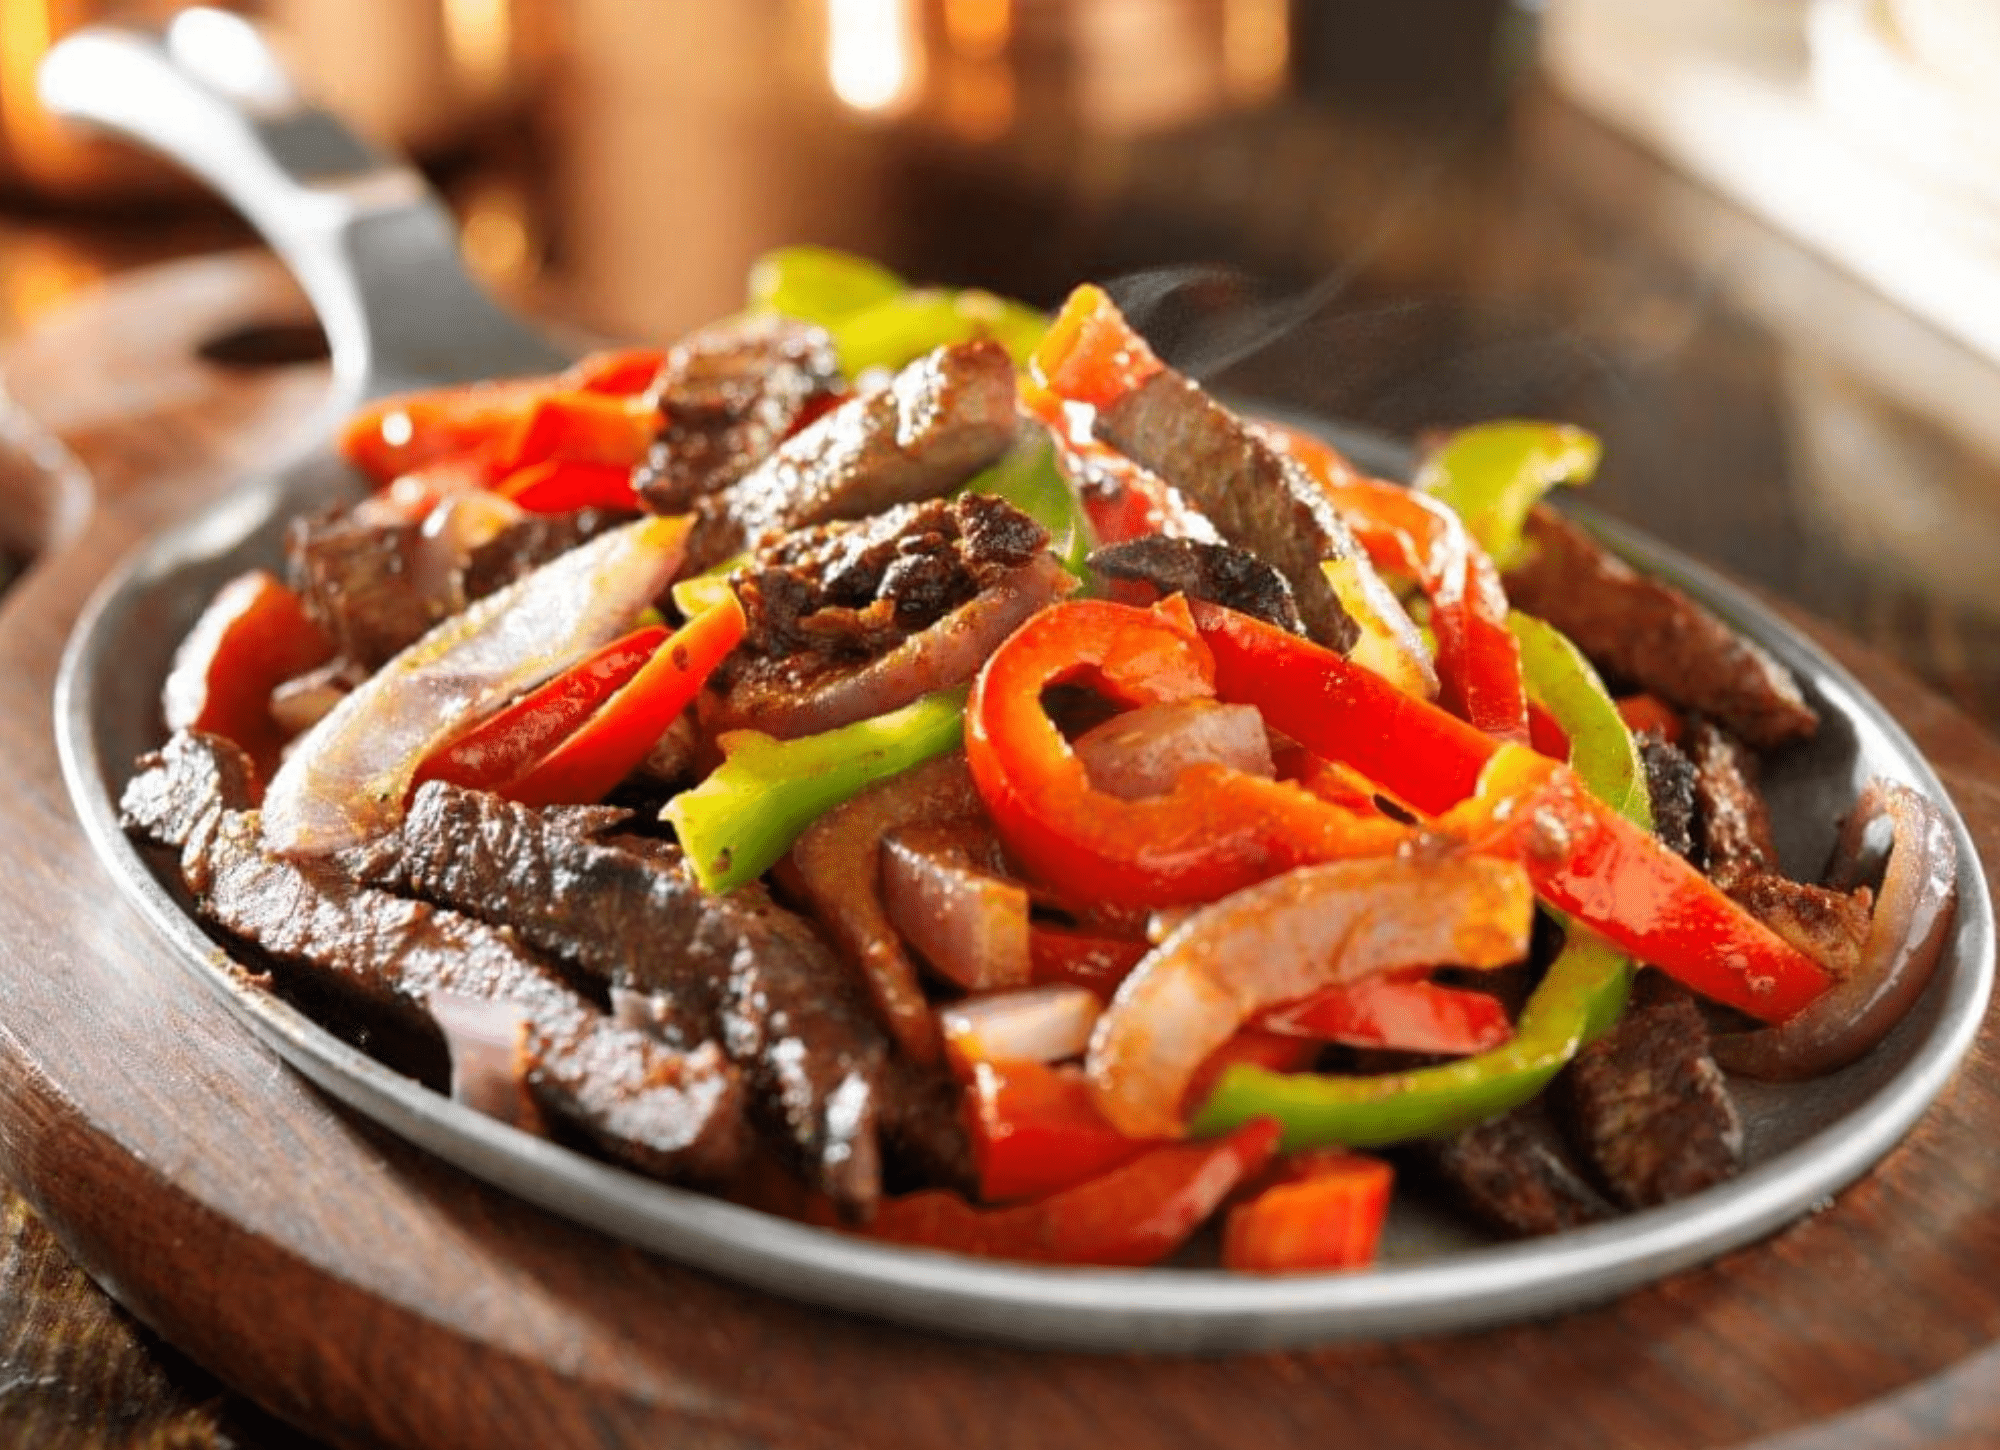 Beef fajitas with onions and bell peppers